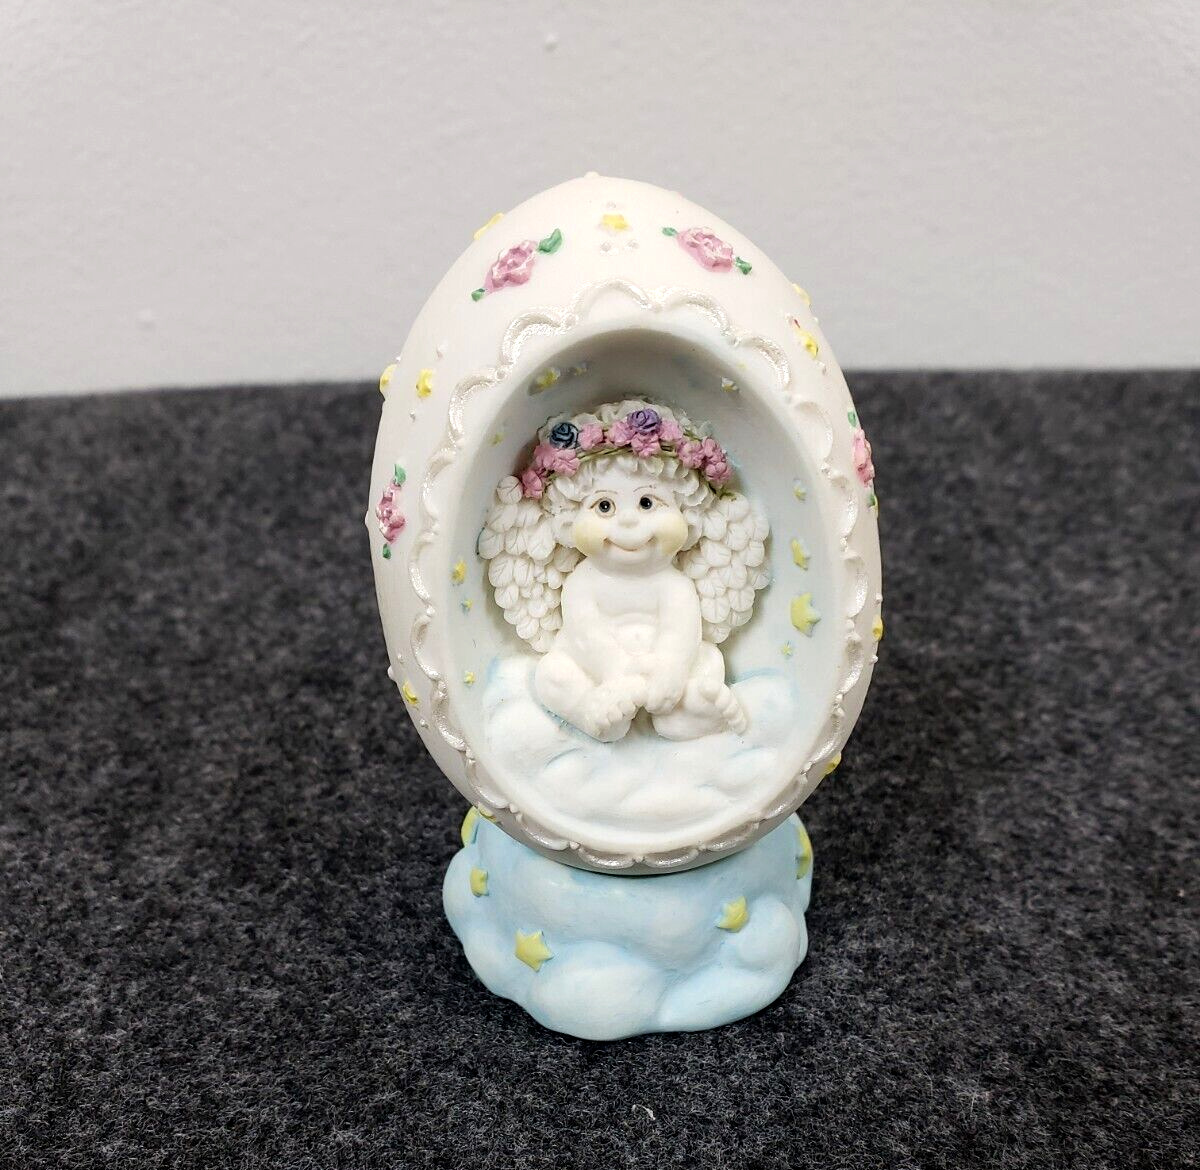 Vintage Dreamsicles 1996 Sitting Pretty egg figurine with stand numbered edition